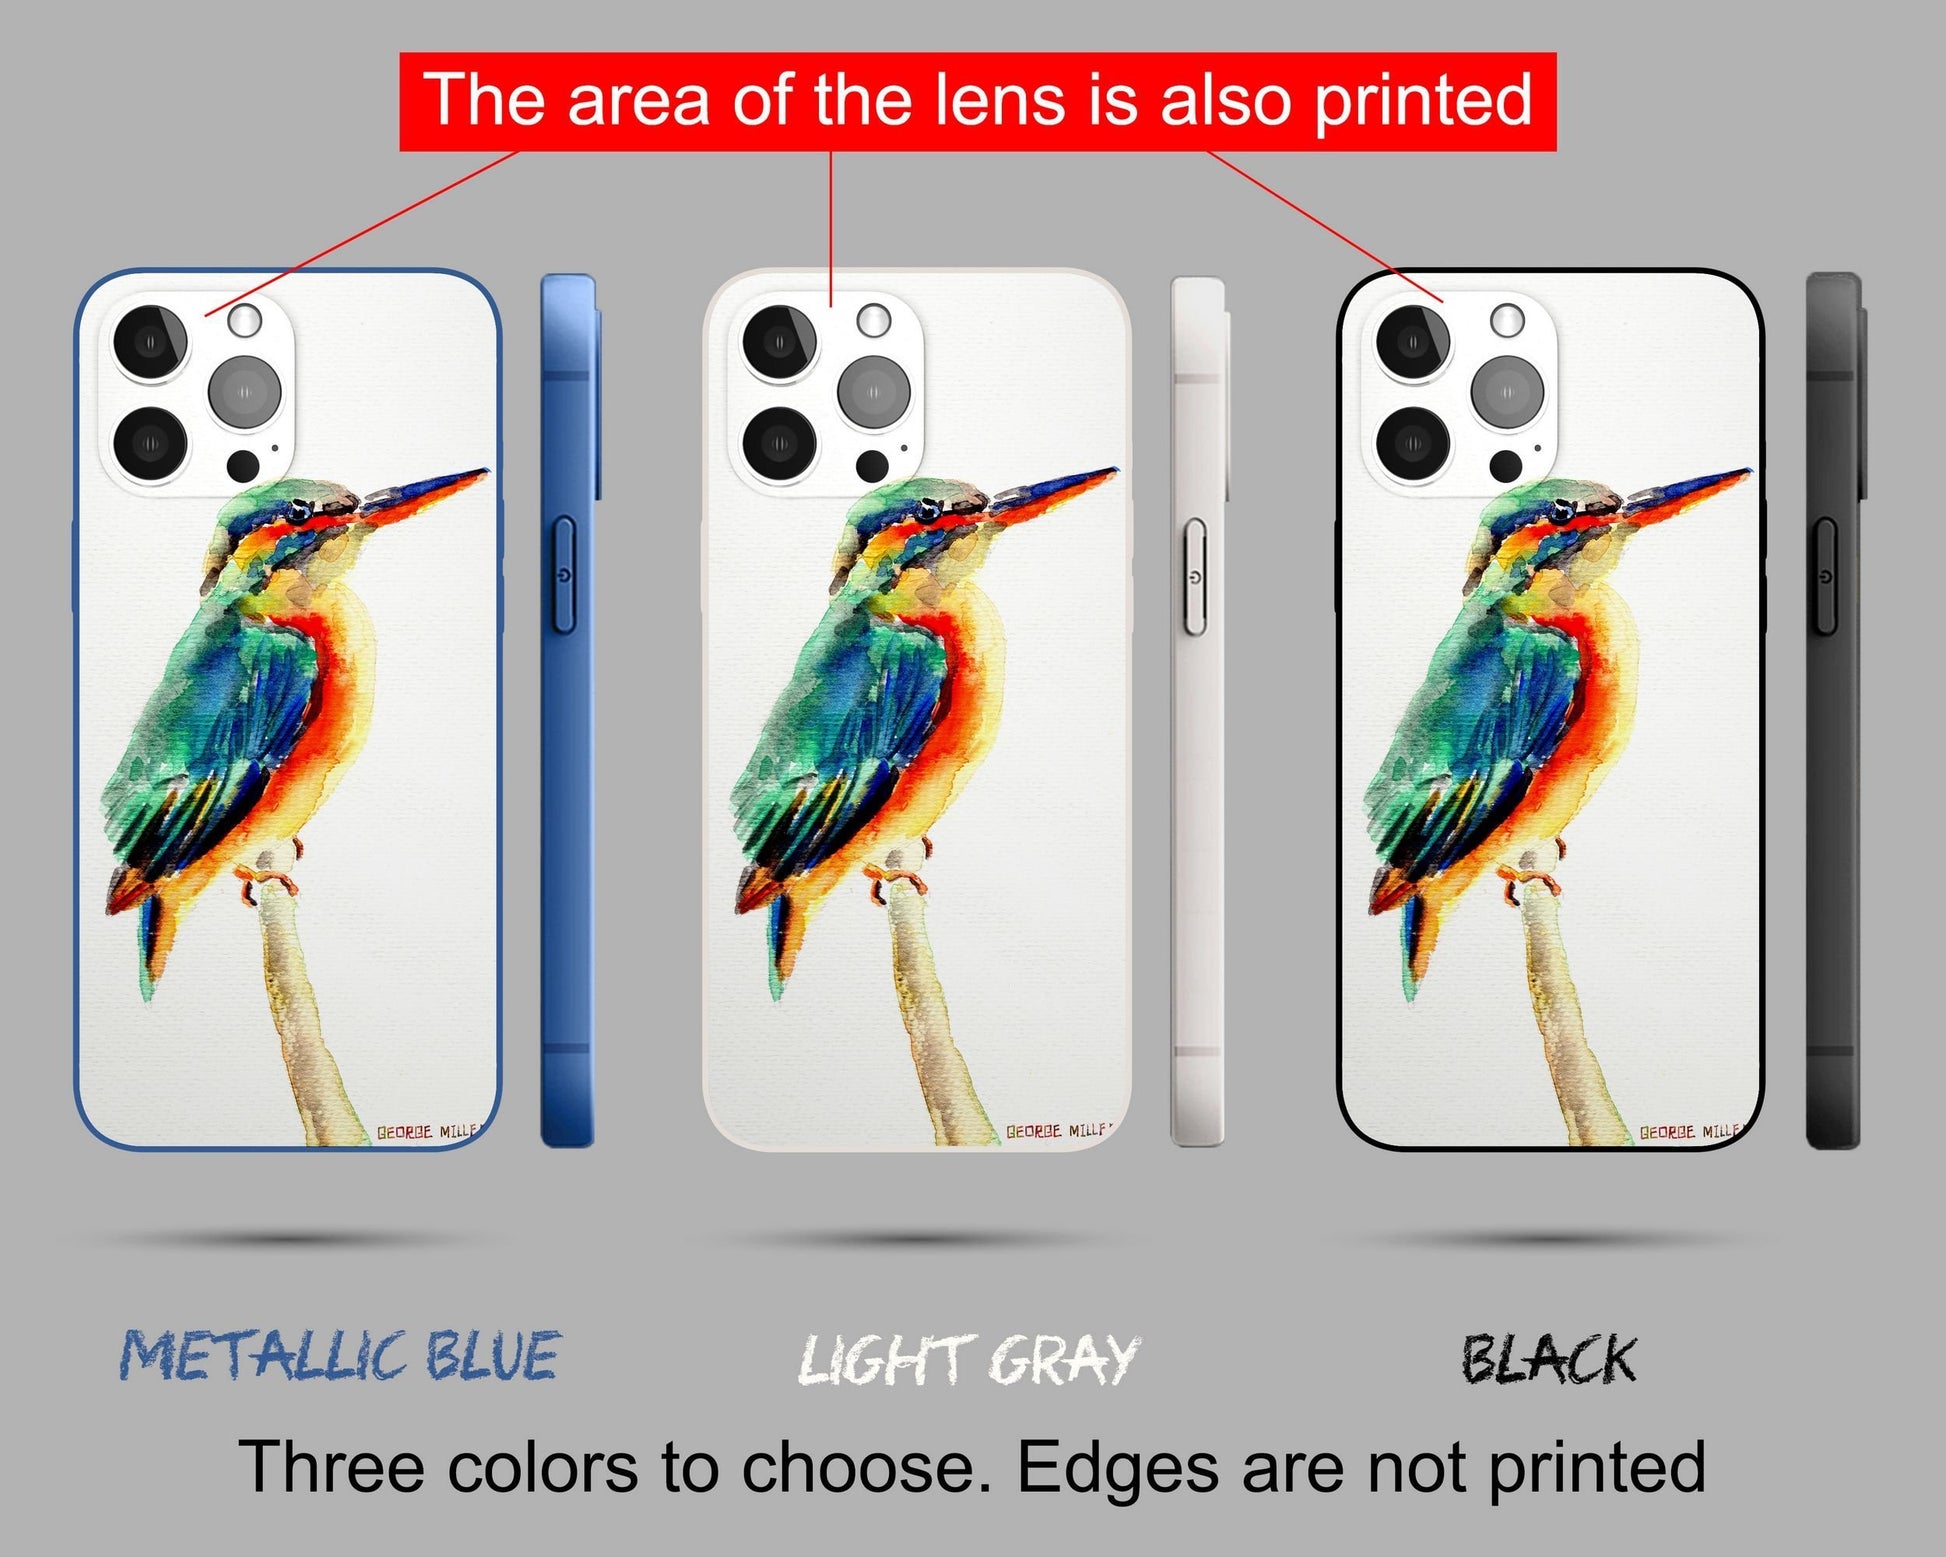 Kingfisher Bird Iphone 14 Case Iphone Cover, Iphone 13, Iphone Xmax, Iphone 8 Plus Case, Aesthetic Phone Case, Gift For Her, Silicone Case